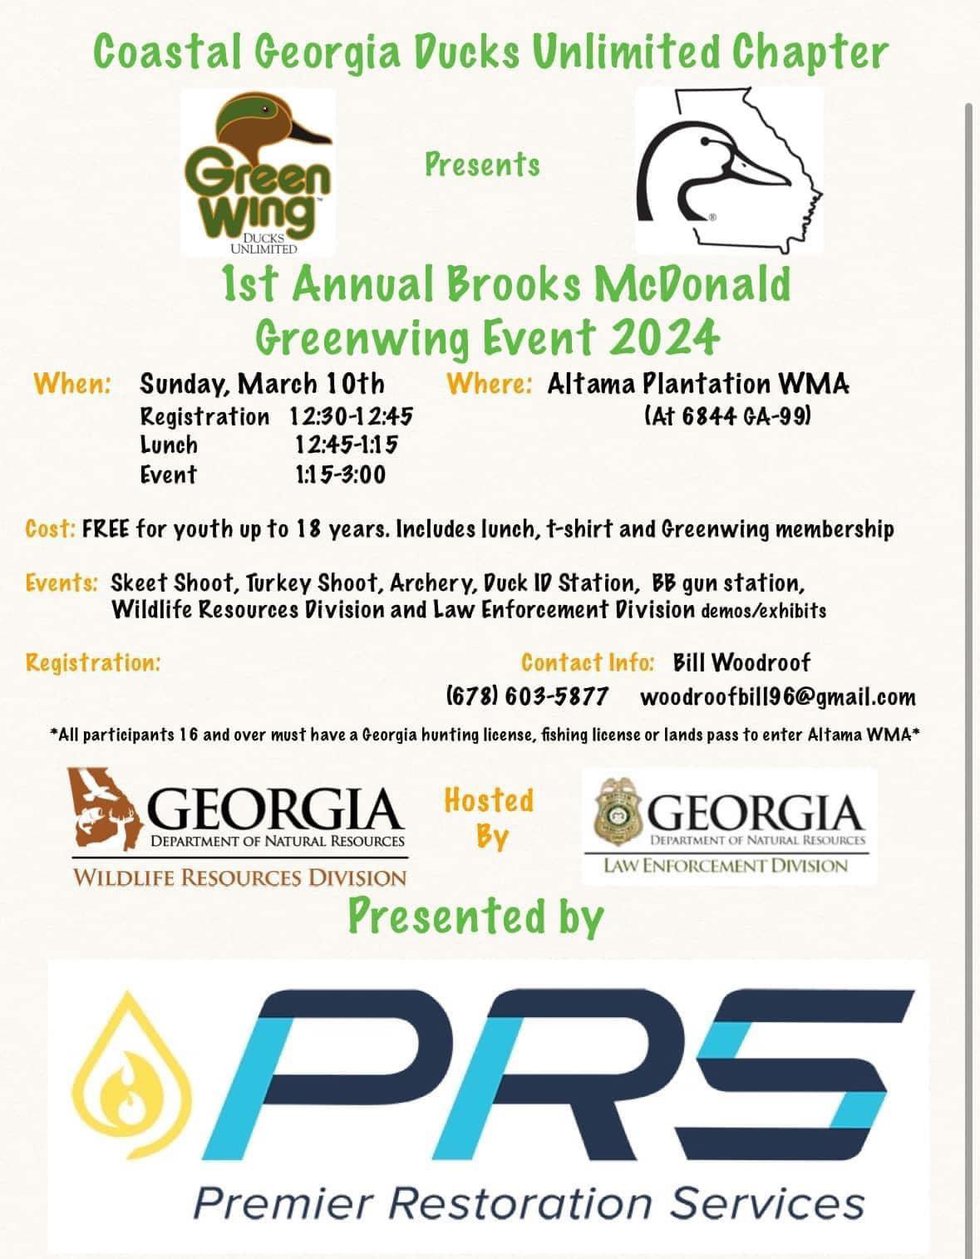 Ducks Unlimited Greenwing Event poster 2024